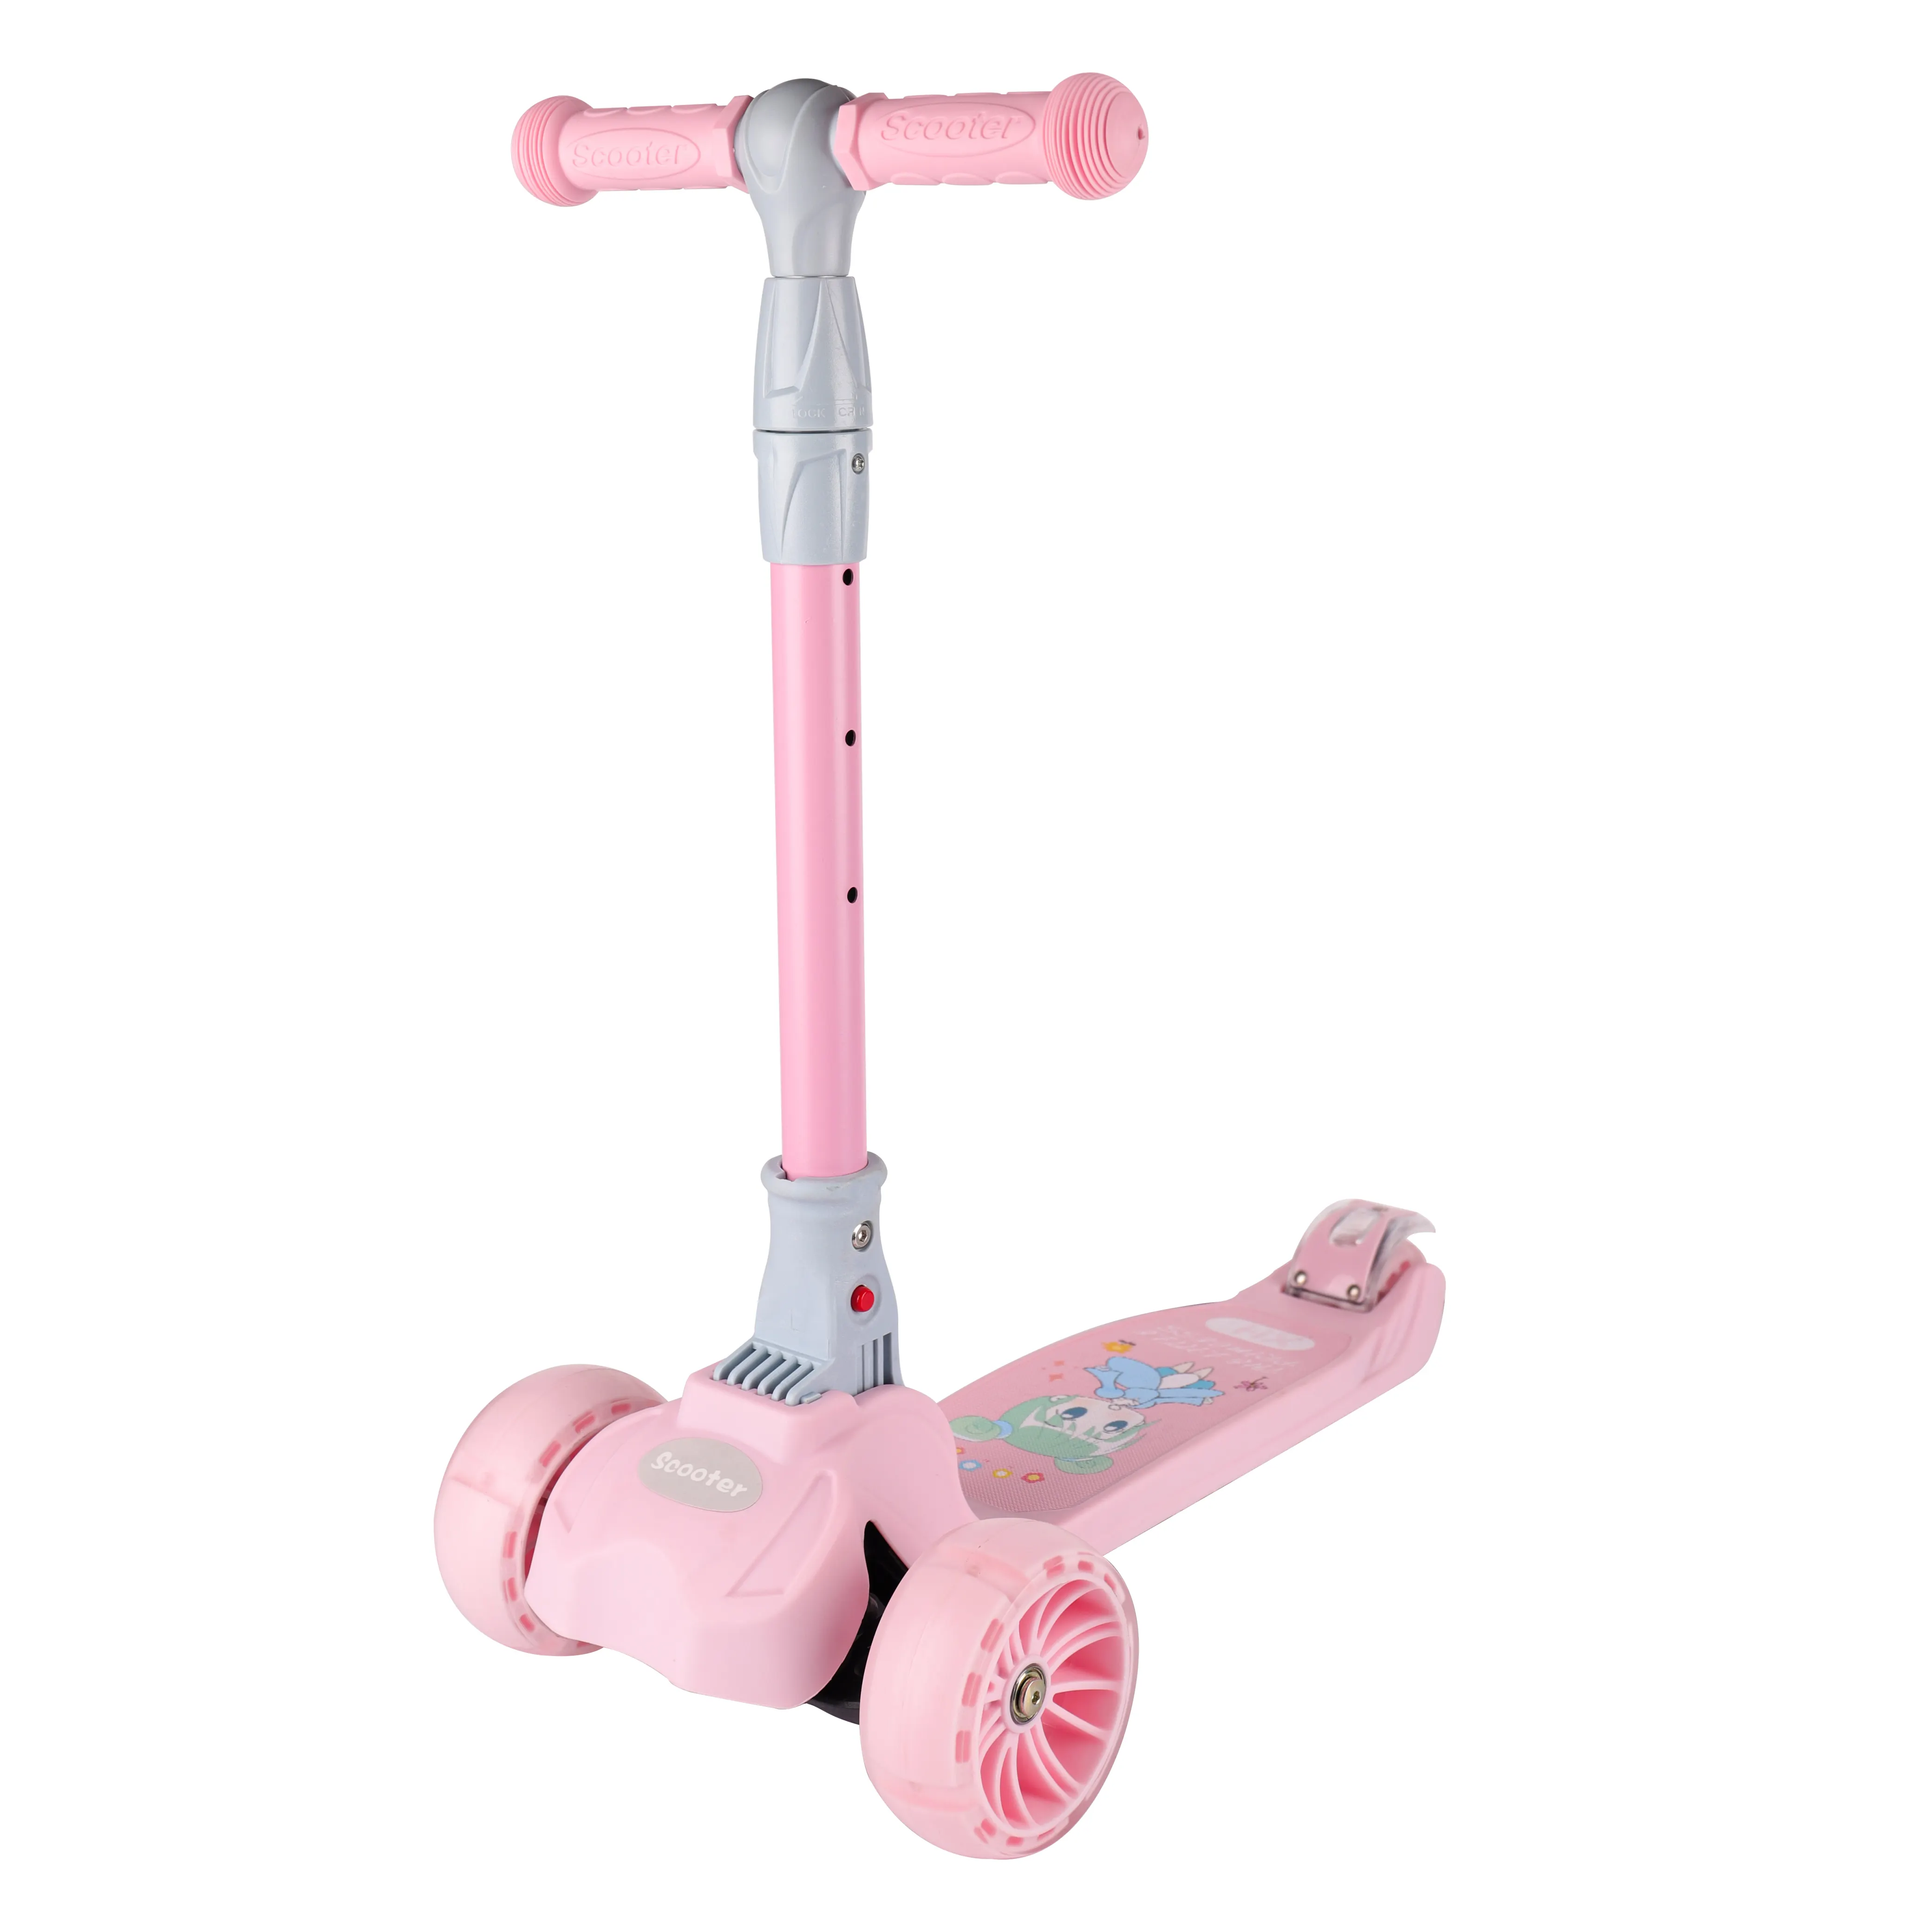 Fast supplier wholesales children s scooters that can be used on multiple grounds